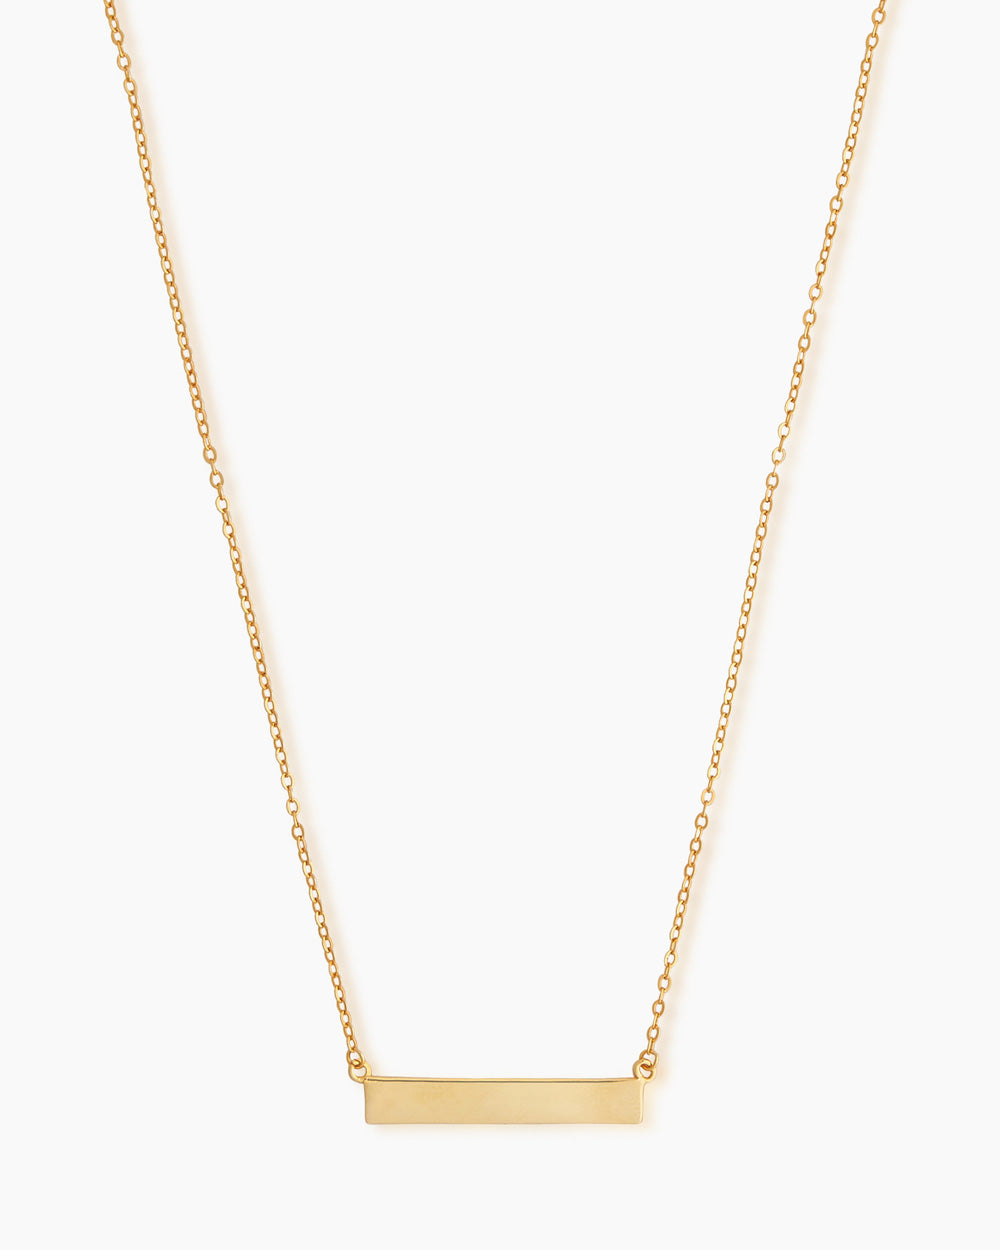 Everyday Modern Jewelry | PENNY PAIRS